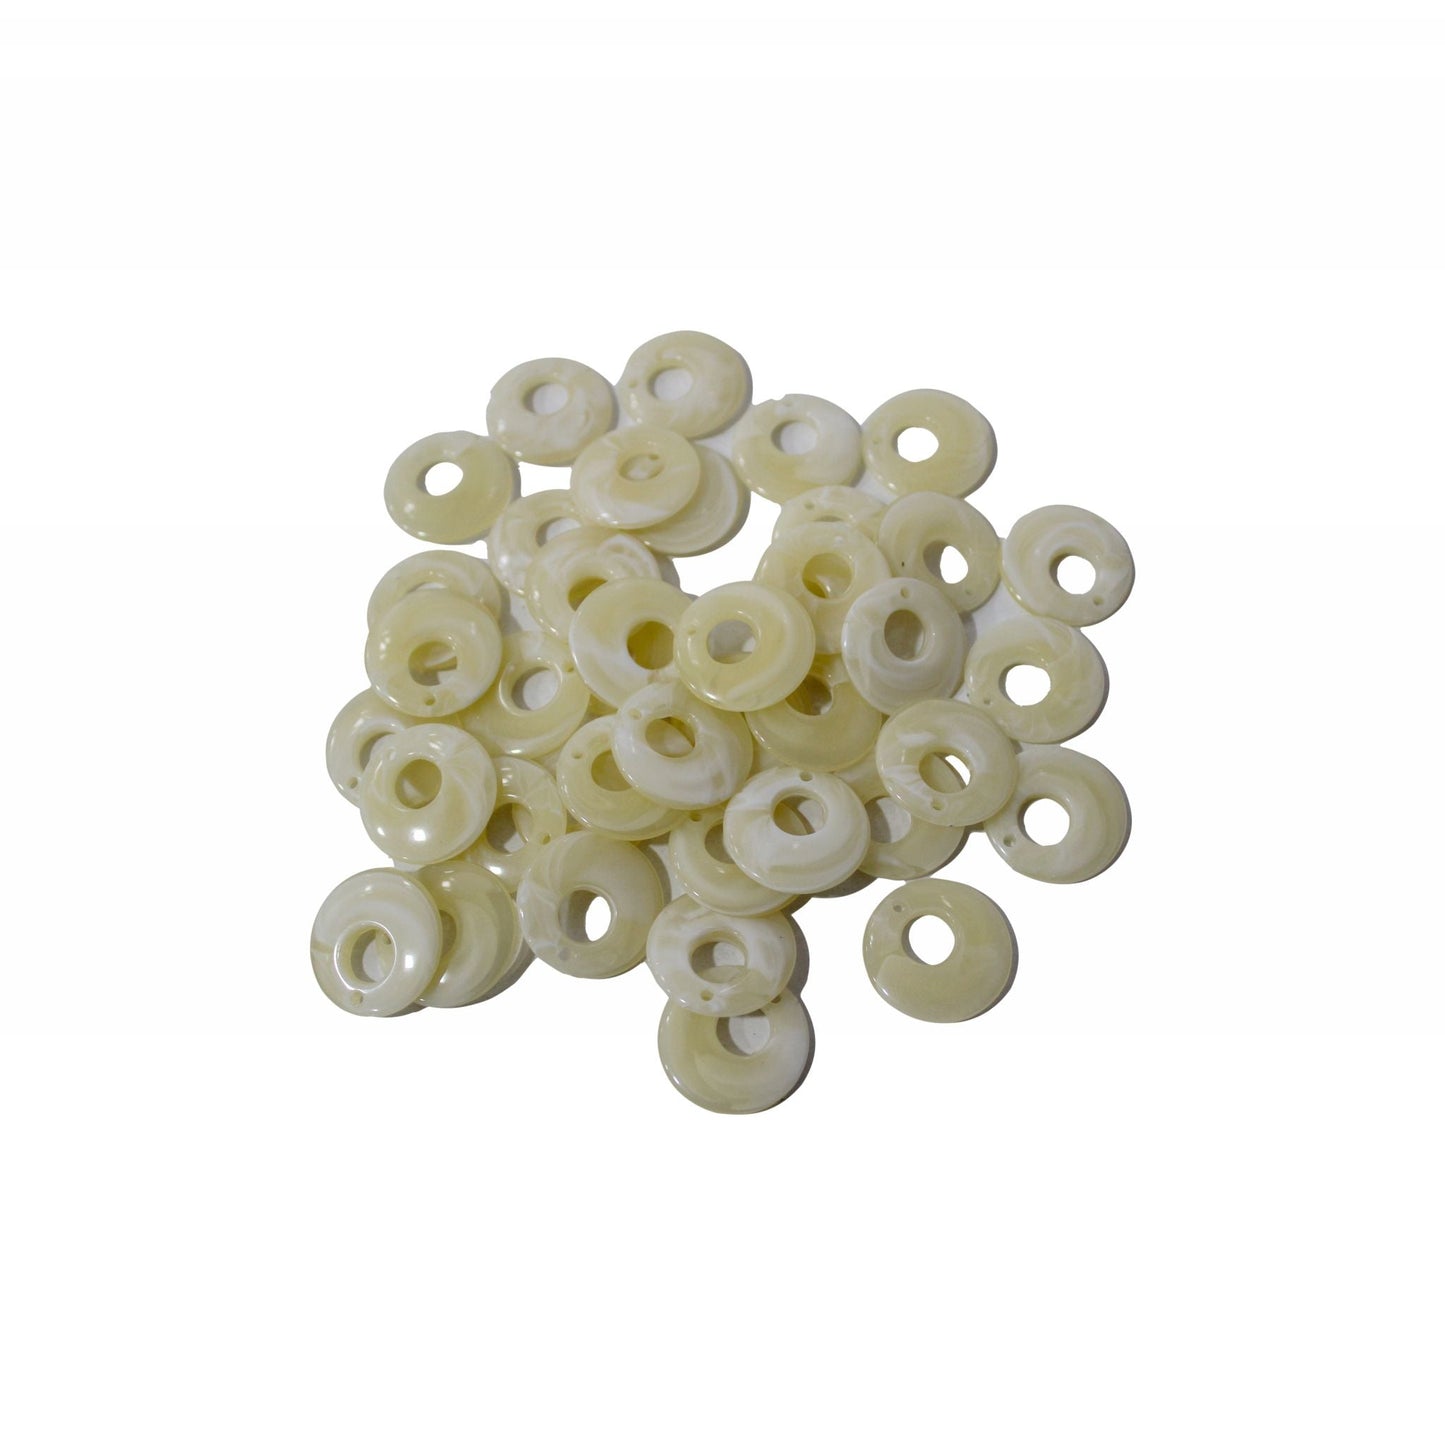 Indian Petals Acrylic Resin Hole Ring Cabochons Motif for Craft or Decoration - 12432, Ivory